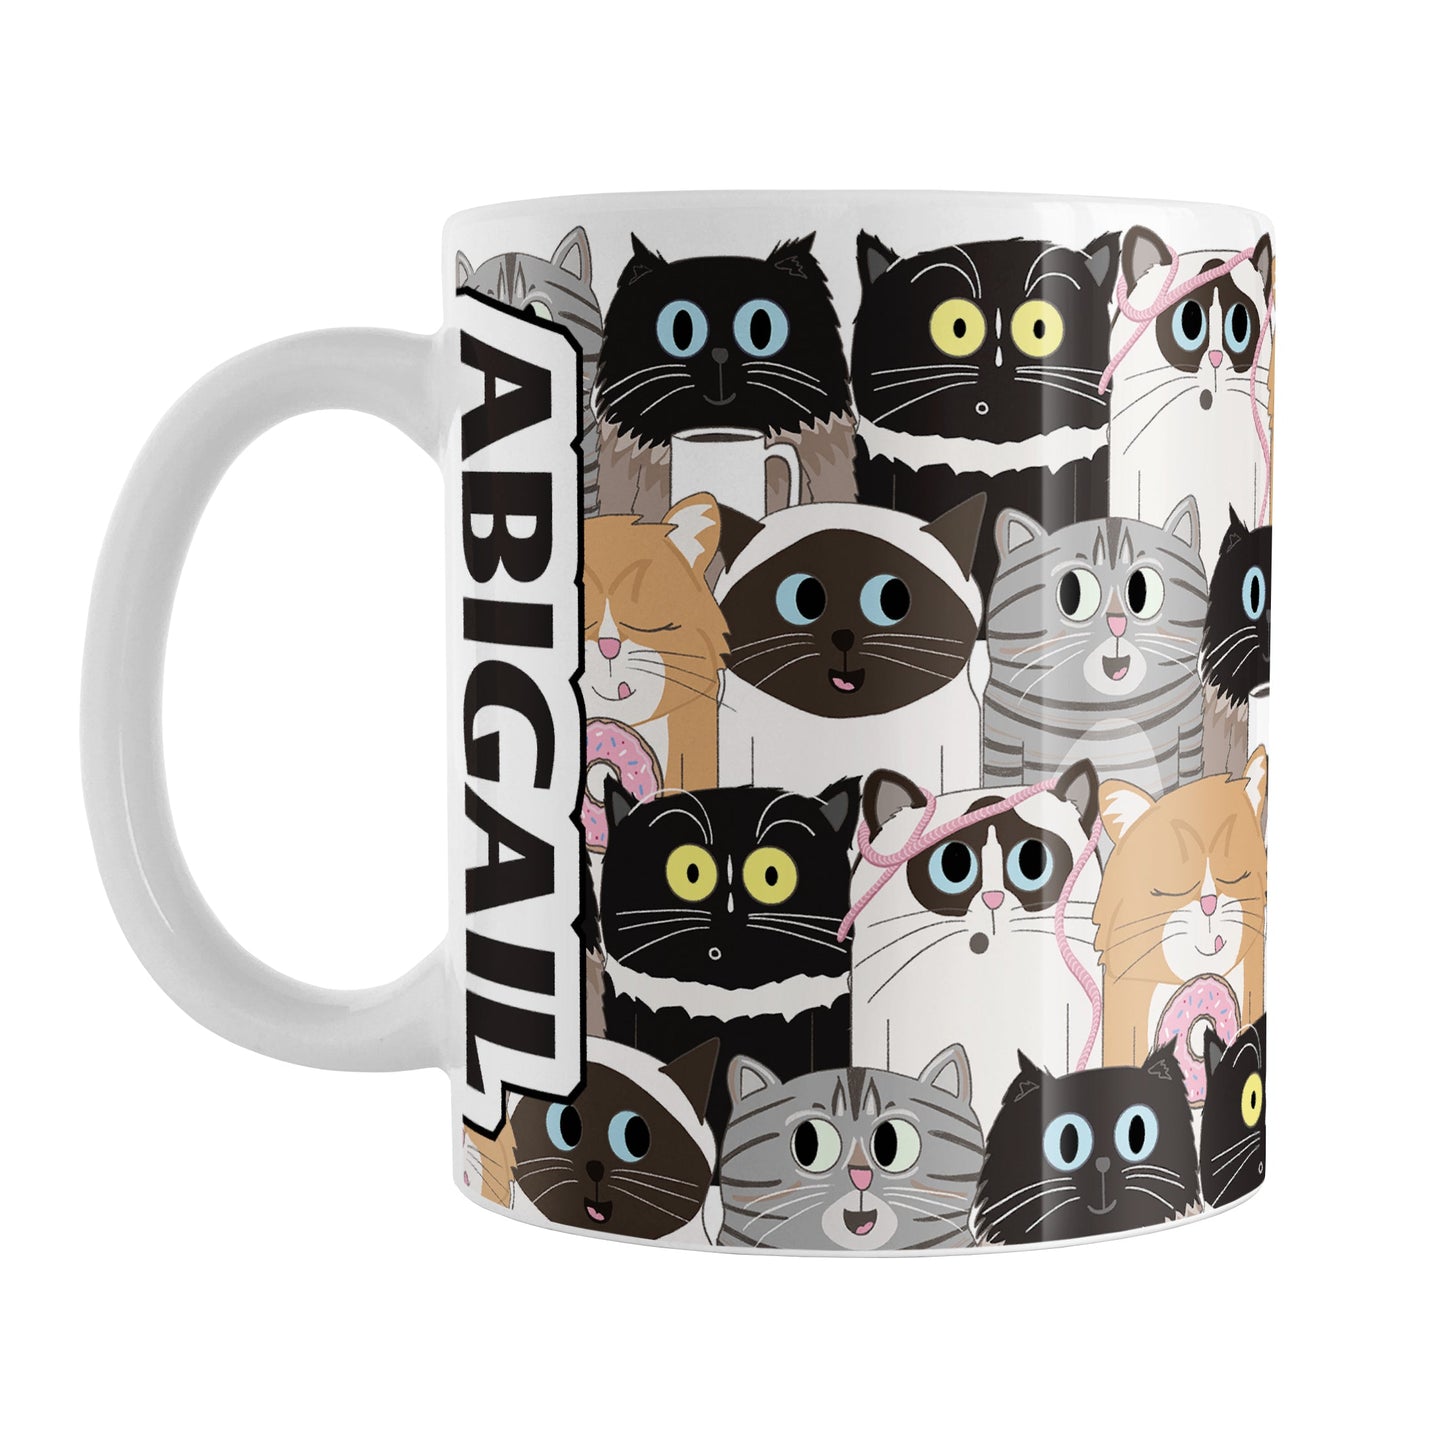 Personalized Cute Cat Stack Pattern Mug (11oz) at Amy's Coffee Mugs. A ceramic coffee mug designed with an illustrated pattern of different breeds of cats with different fun expressions, with yarn, coffee, and donuts. This stacked pattern of cats wraps around the ceramic mug to the handle where your name is custom printed in black on white vertically at the edge of the design.